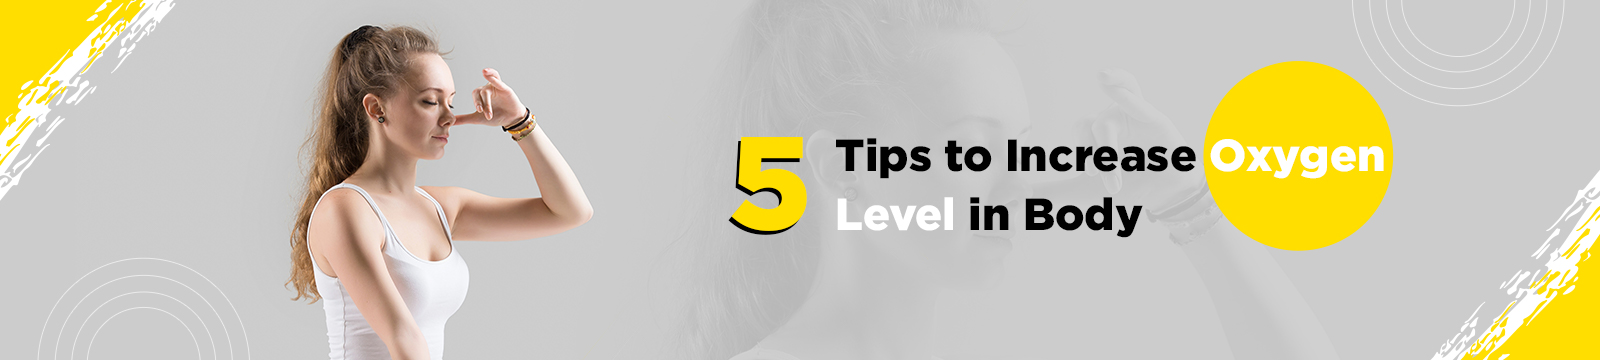 5 Tips to Increase Oxygen Level in Body